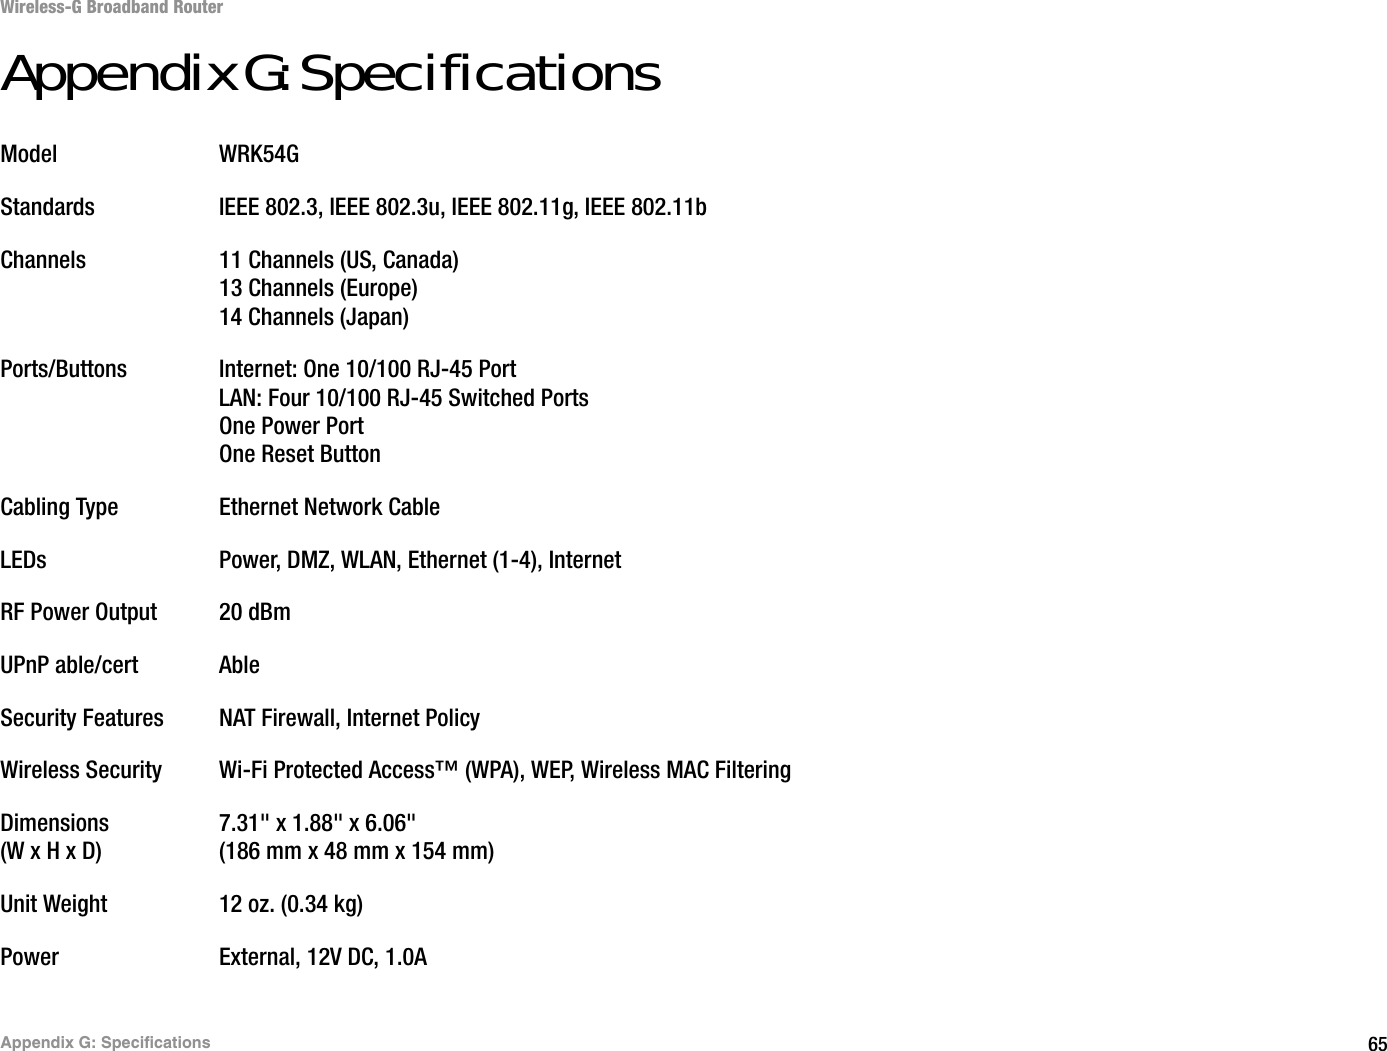 65Appendix G: SpecificationsWireless-G Broadband RouterAppendix G: SpecificationsModel WRK54GStandards IEEE 802.3, IEEE 802.3u, IEEE 802.11g, IEEE 802.11bChannels 11 Channels (US, Canada)13 Channels (Europe)14 Channels (Japan)Ports/Buttons Internet: One 10/100 RJ-45 PortLAN: Four 10/100 RJ-45 Switched PortsOne Power PortOne Reset ButtonCabling Type Ethernet Network CableLEDs Power, DMZ, WLAN, Ethernet (1-4), InternetRF Power Output 20 dBmUPnP able/cert AbleSecurity Features NAT Firewall, Internet PolicyWireless Security Wi-Fi Protected Access™ (WPA), WEP, Wireless MAC FilteringDimensions 7.31&quot; x 1.88&quot; x 6.06&quot;(W x H x D) (186 mm x 48 mm x 154 mm)Unit Weight 12 oz. (0.34 kg)Power External, 12V DC, 1.0A